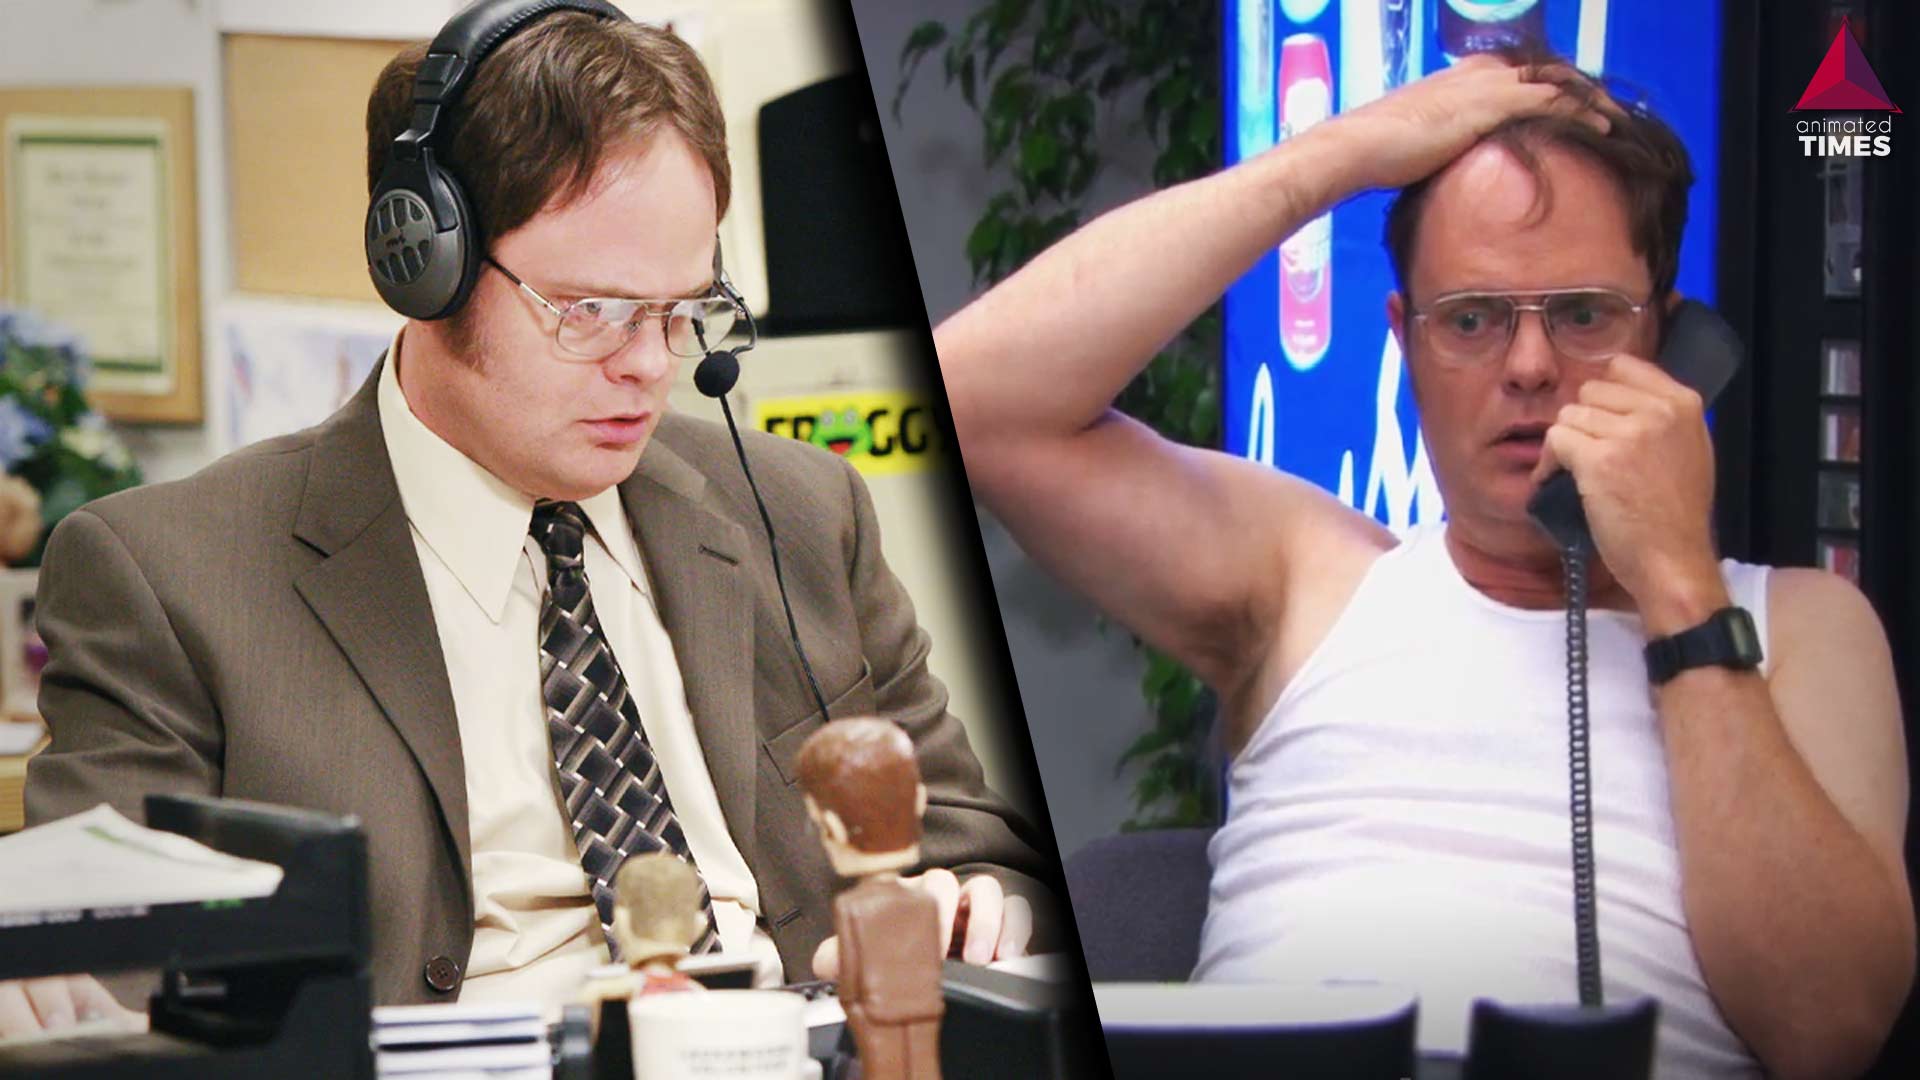 The Office: 10 Funniest Phone Calls by Dwight Schrute